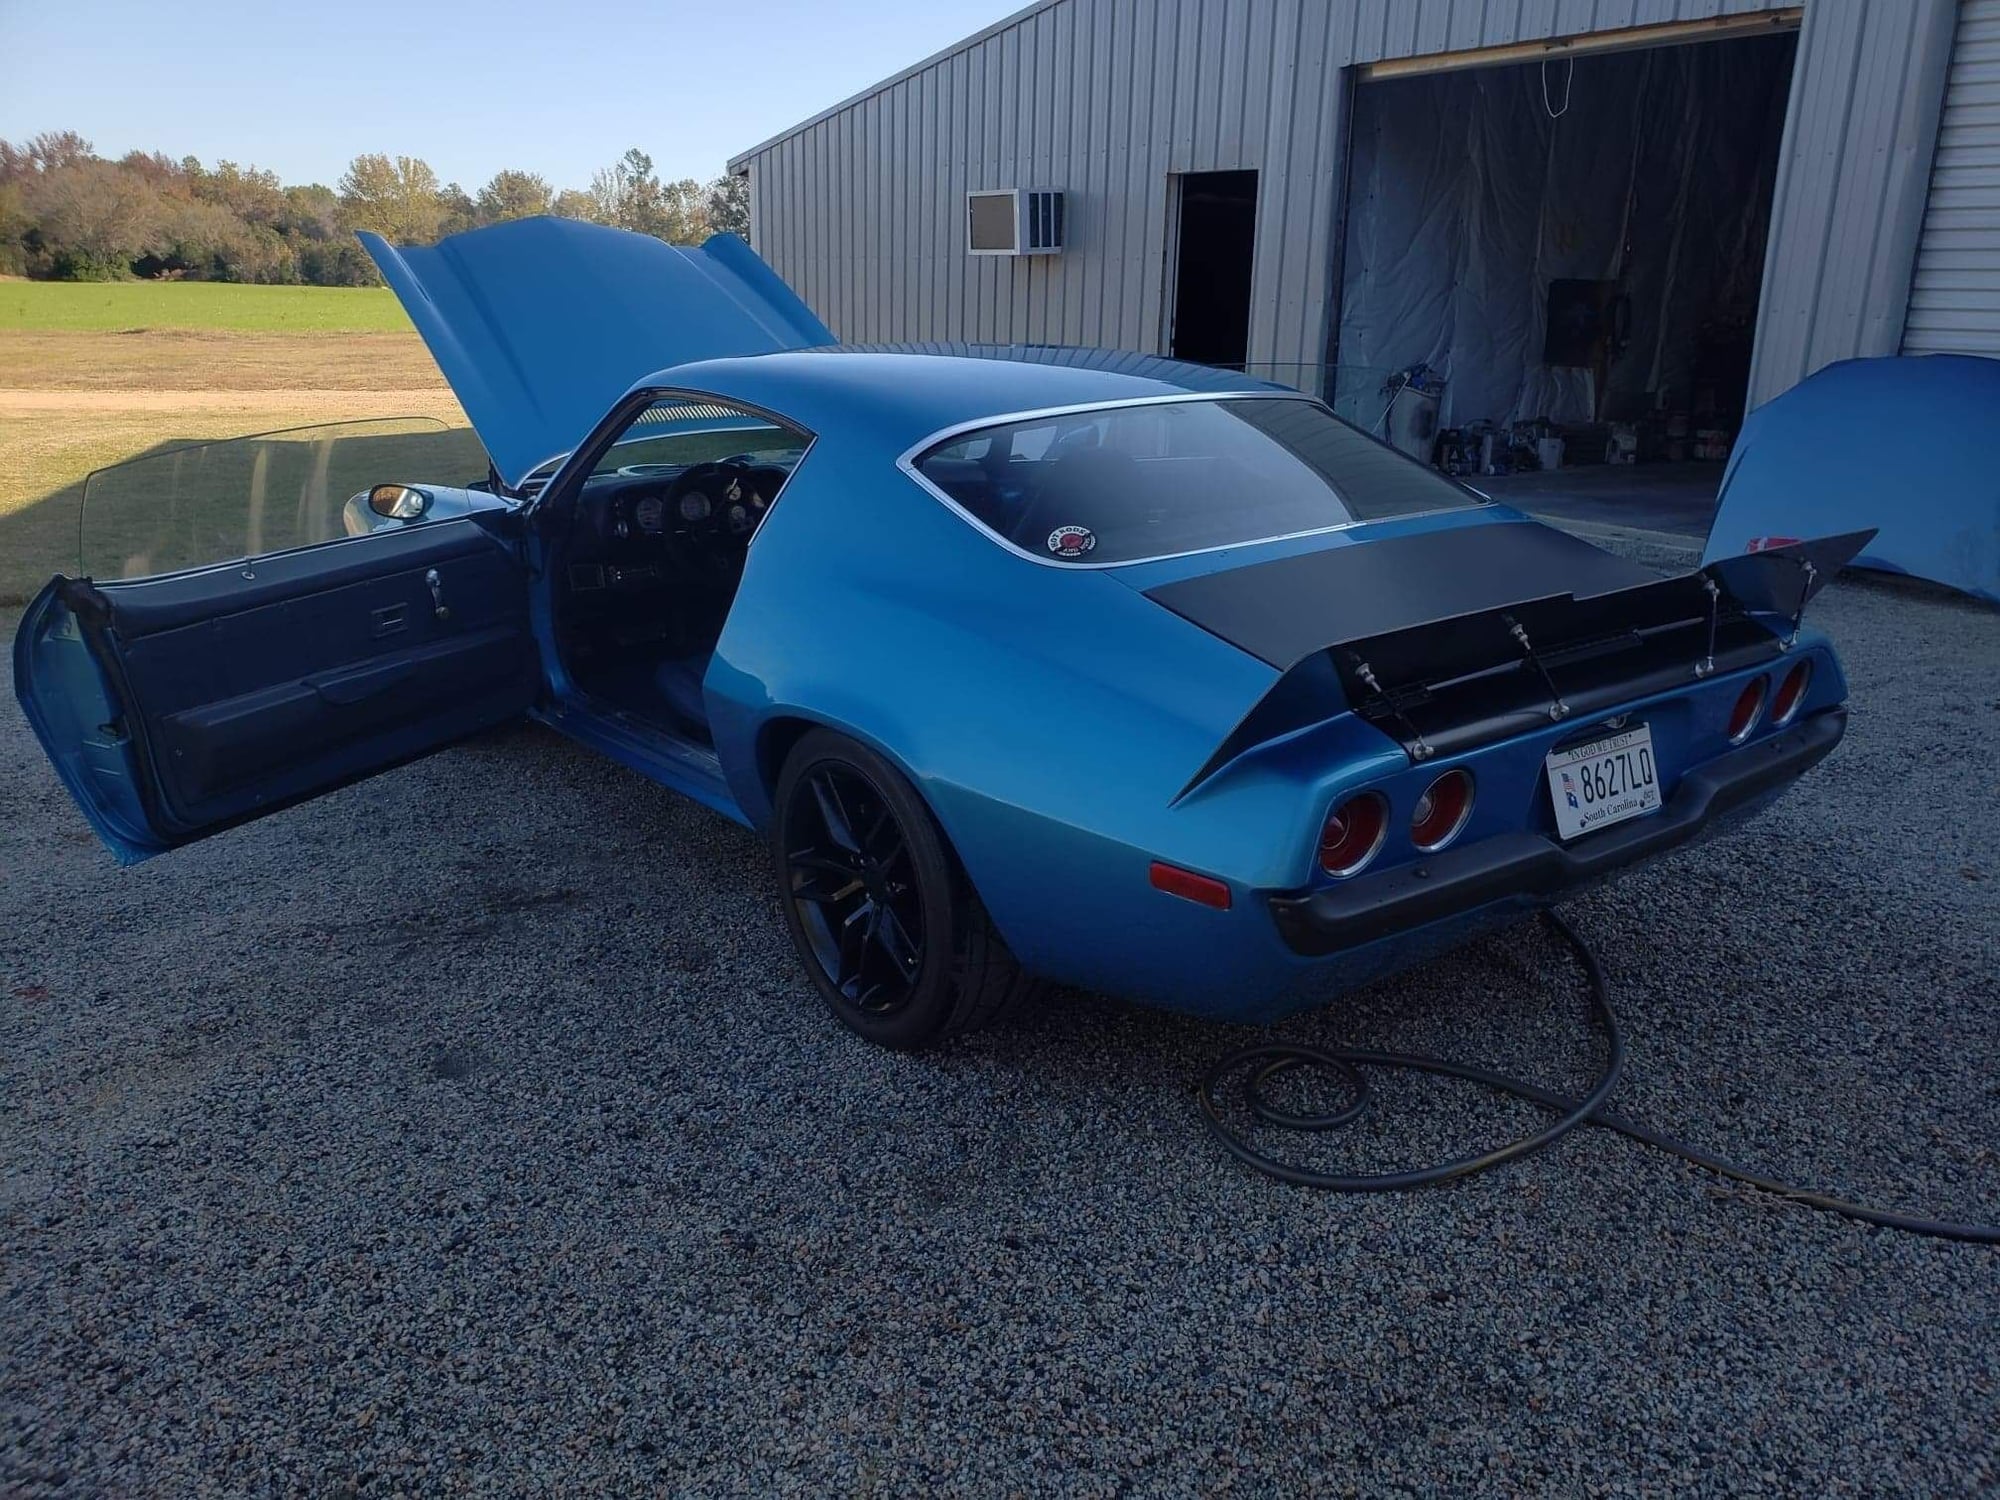 1971 Chevrolet Camaro - 1971 Camaro 383 LS1/4l60e swap, lots of custom pieces, and other modifications - Used - VIN 1111111111 - 8 cyl - 2WD - Automatic - Coupe - Blue - Raleigh, NC 27606, United States